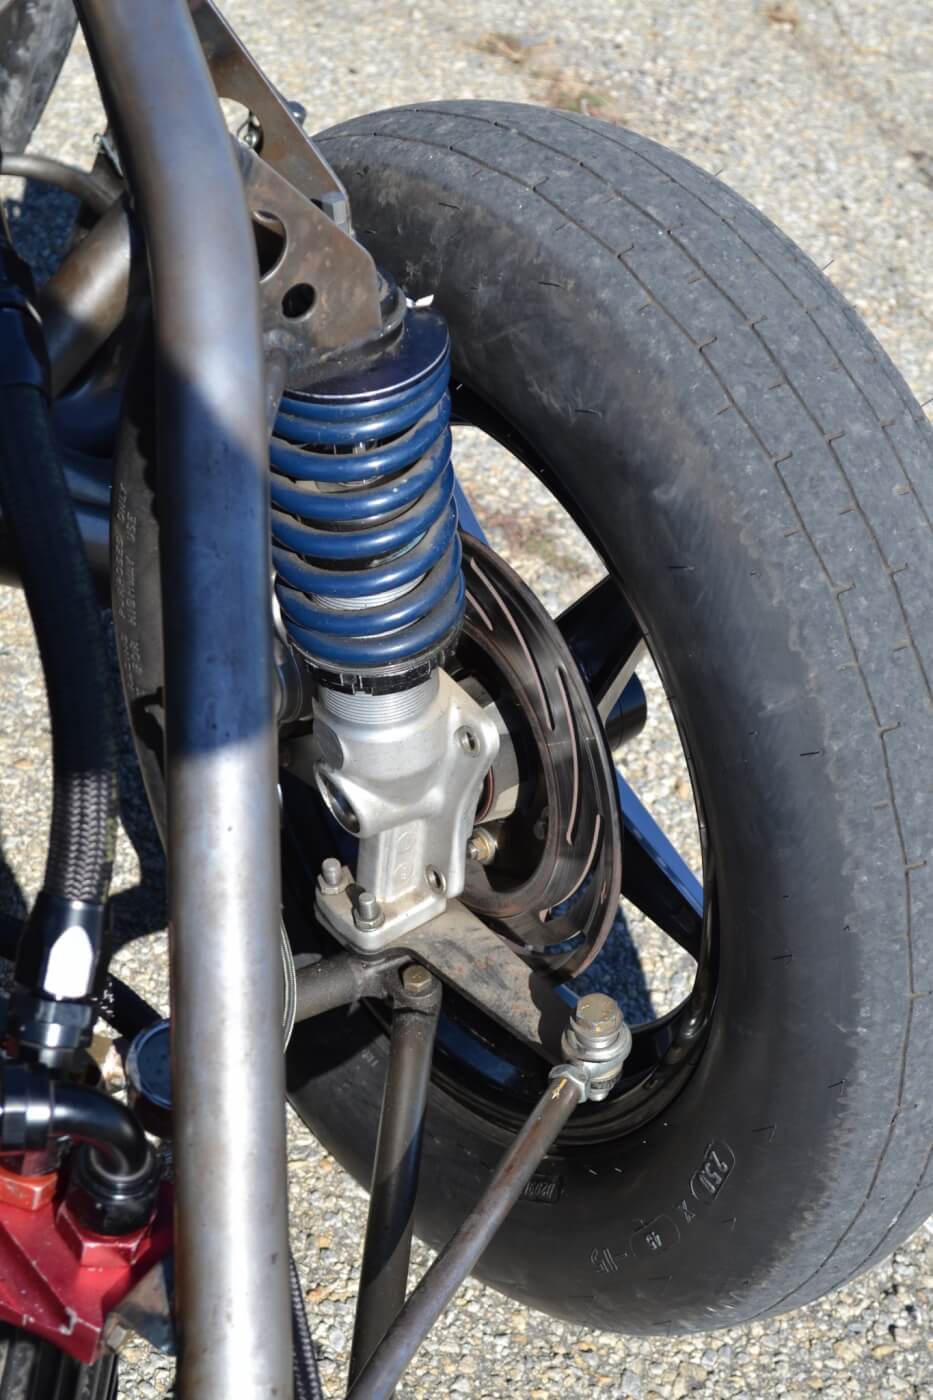 The front suspension is also a drag race affair, as Strange struts are employed. Combined with a rack and pinion steering unit, the entire front steering, suspension, and brakes are well under 100 lbs. combined.